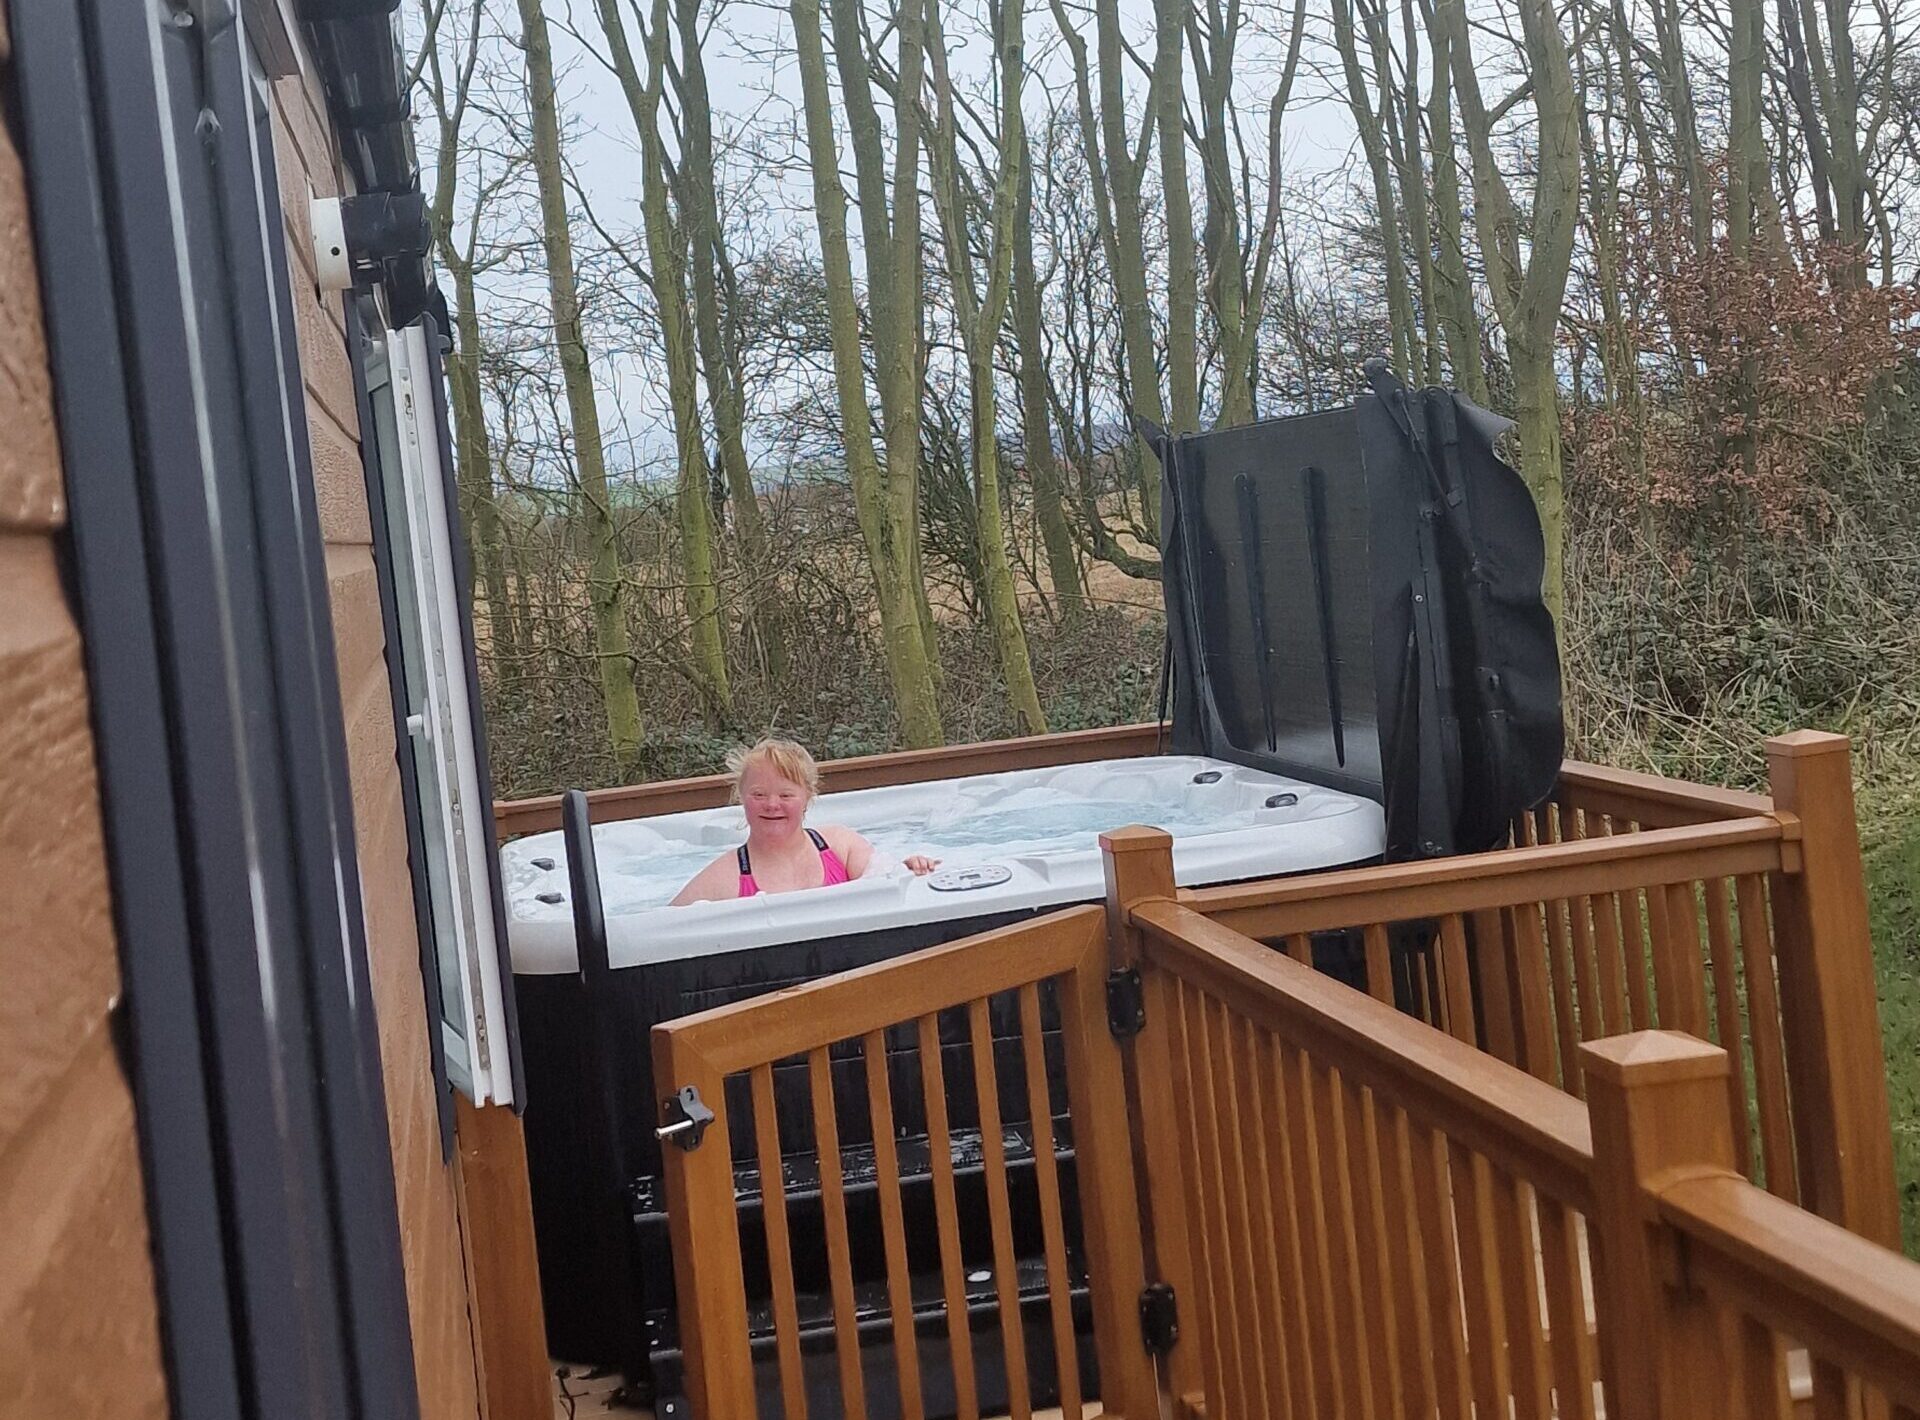 A young lady enjoying a hot tub whilst on holiday.